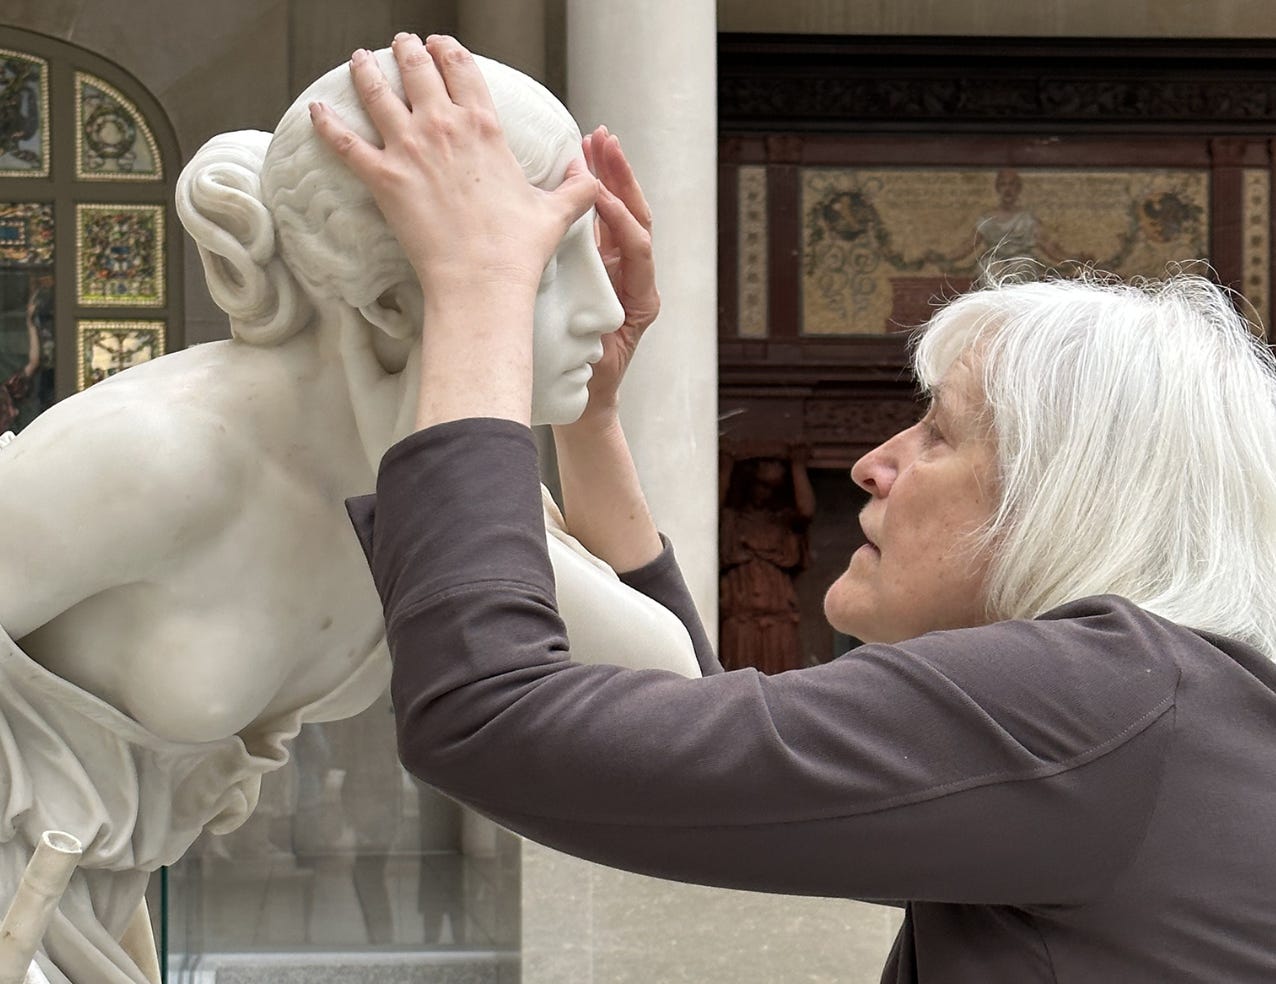 Image of the writer and professor Georgina Kleege, with her hands around the head of Nydia, The Blind Flower Girl of Pompeii, during a touch tour in the American Wing Engelhard Sculpture Court at The Met, a skylit space with direct, dramatic natural light. The image depicts the profile of a grey-white-haired woman with medium long straight hair with a long-sleeved brownish purple sweater touching the face of an almost life-sized white marble statue of a young girl. Her left hand is on the top of the sculpture's head, and her right thumb is touching the forehead. Two decorative artworks are installed into the wall in the background: one stained glass window and a fireplace.